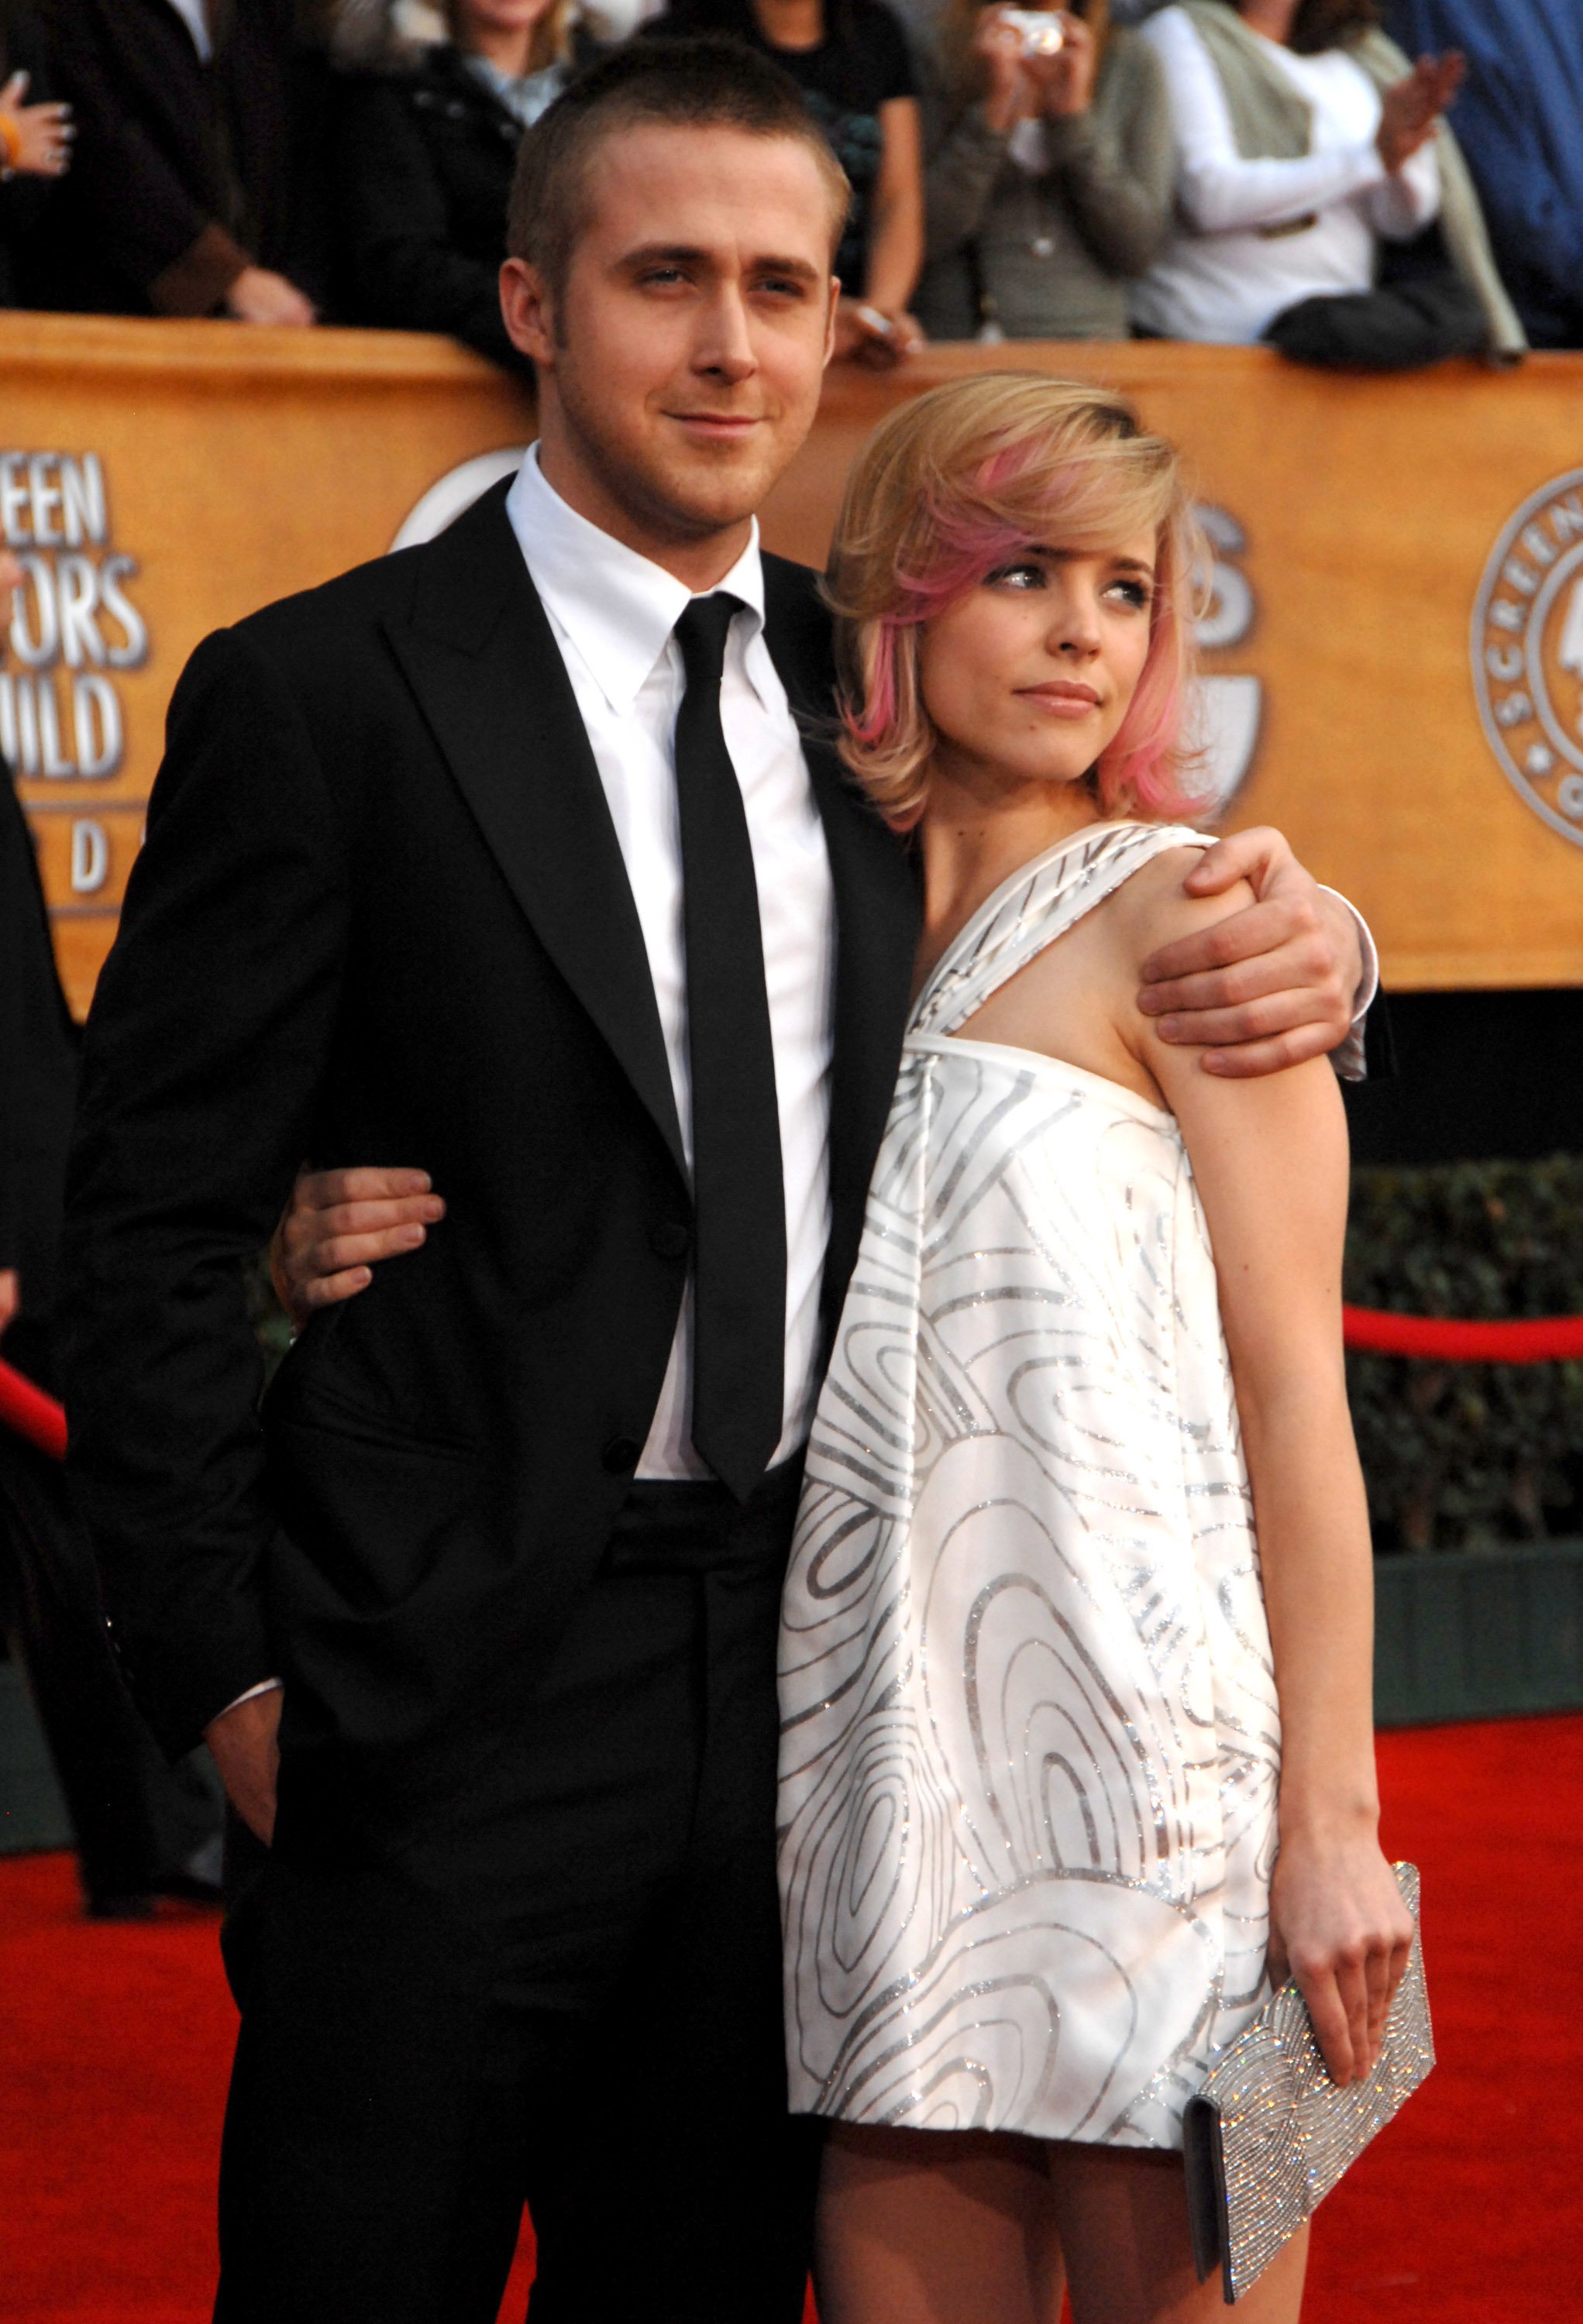 Ryan Gosling and Rachel McAdams during 13th Annual Screen Actors Guild Awards - Arrivals at Shrine Auditorium in Los Angeles, California on January 28, 2007. | Source: Getty Images